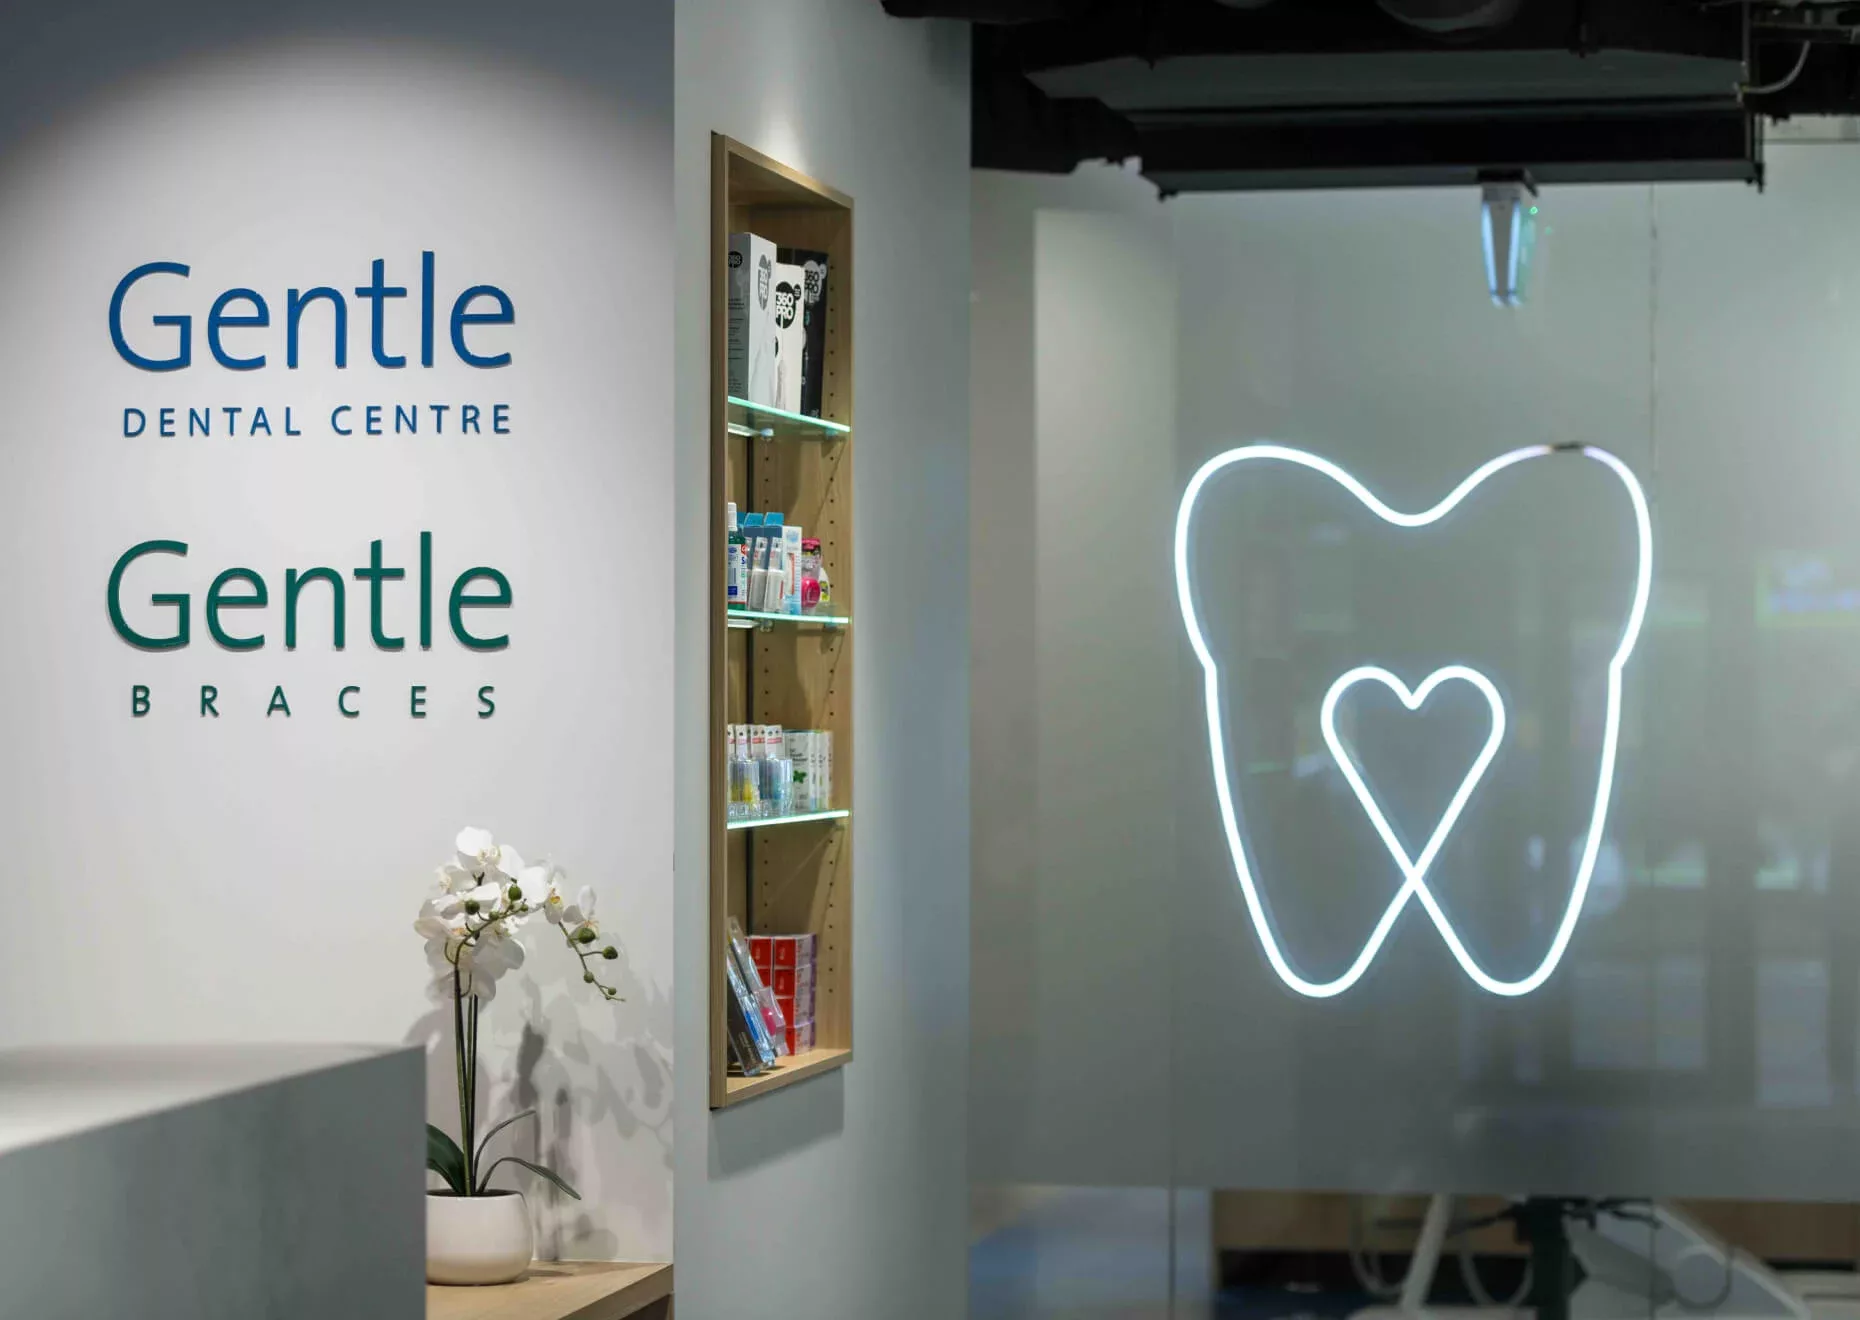 Gentle Dental internal offices and signage